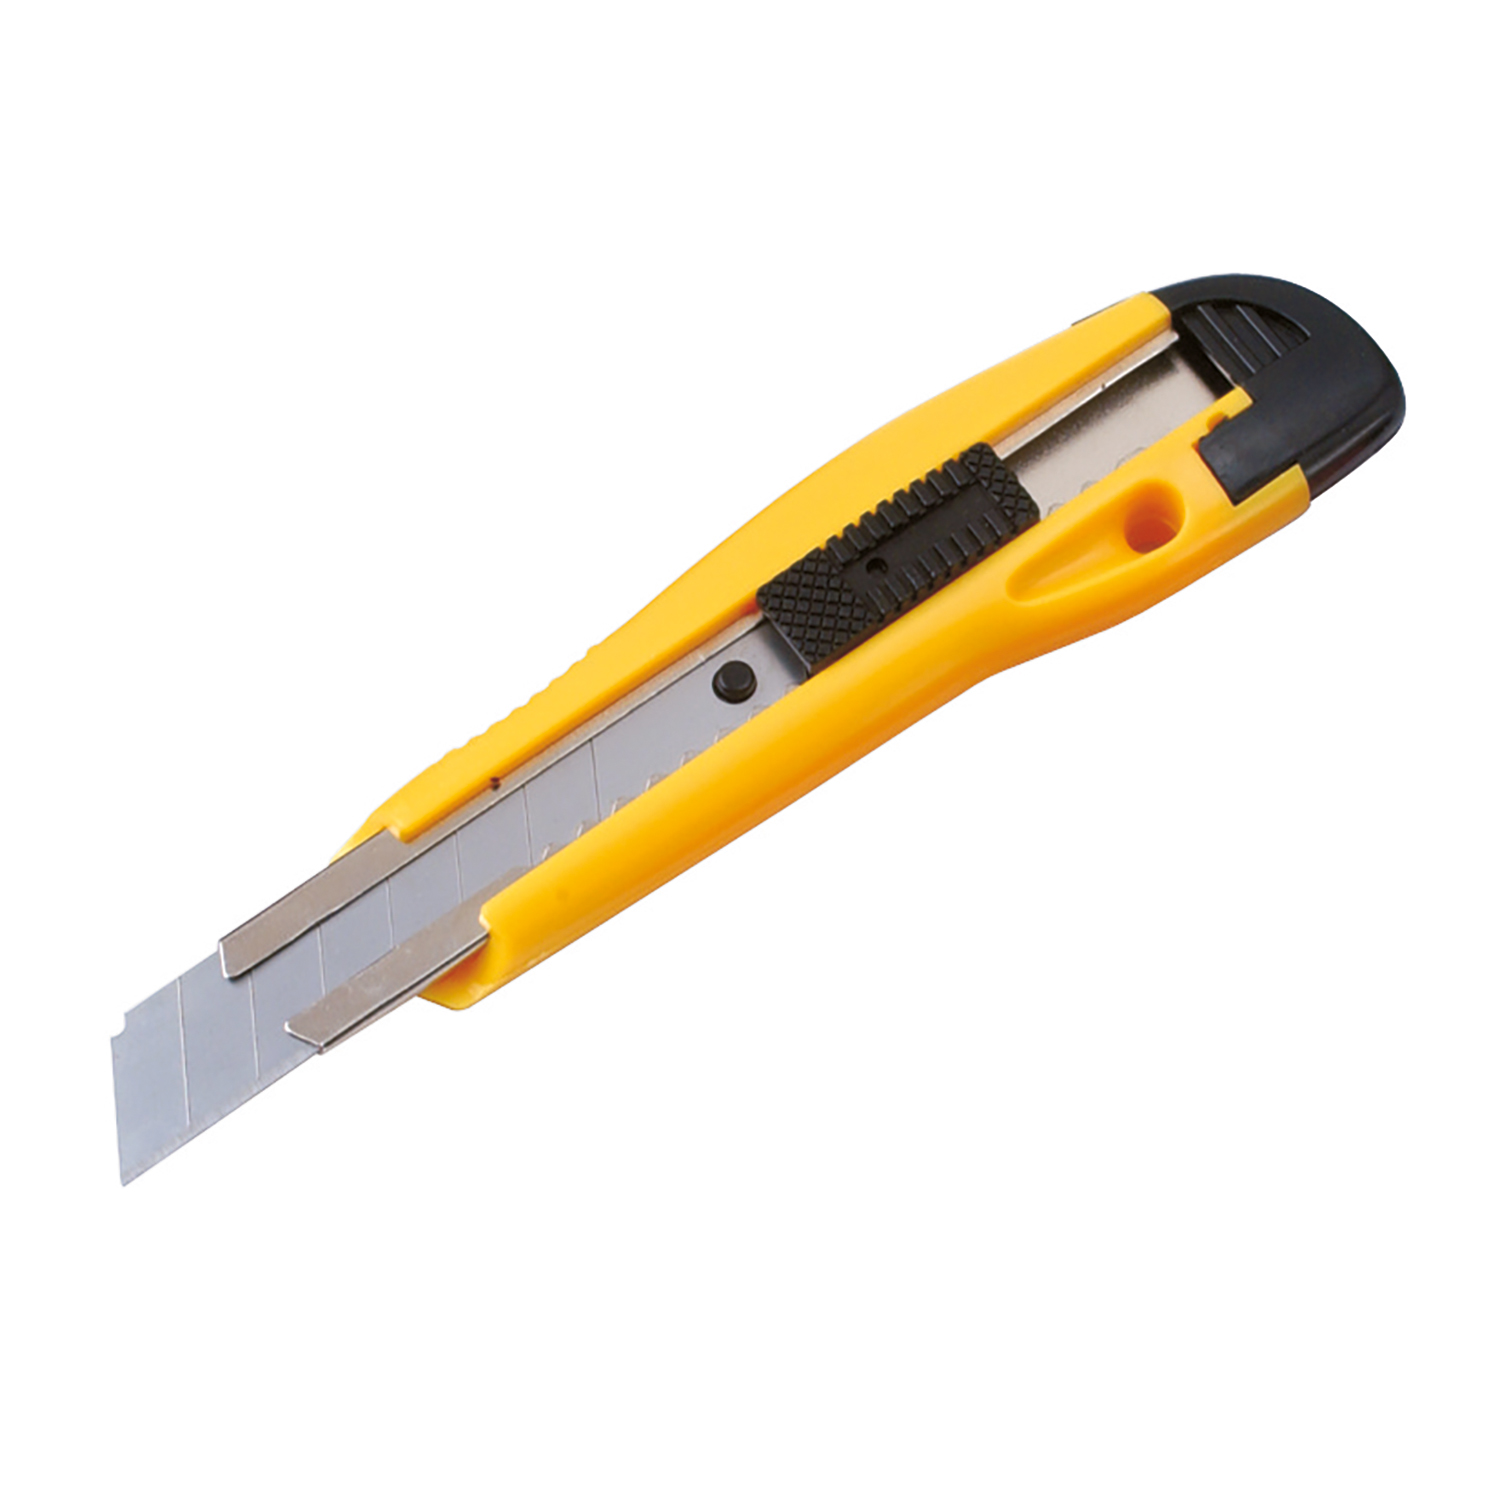 5 Star Office Cutting Knife Medium Duty with Locking Device and Snap-off Blades